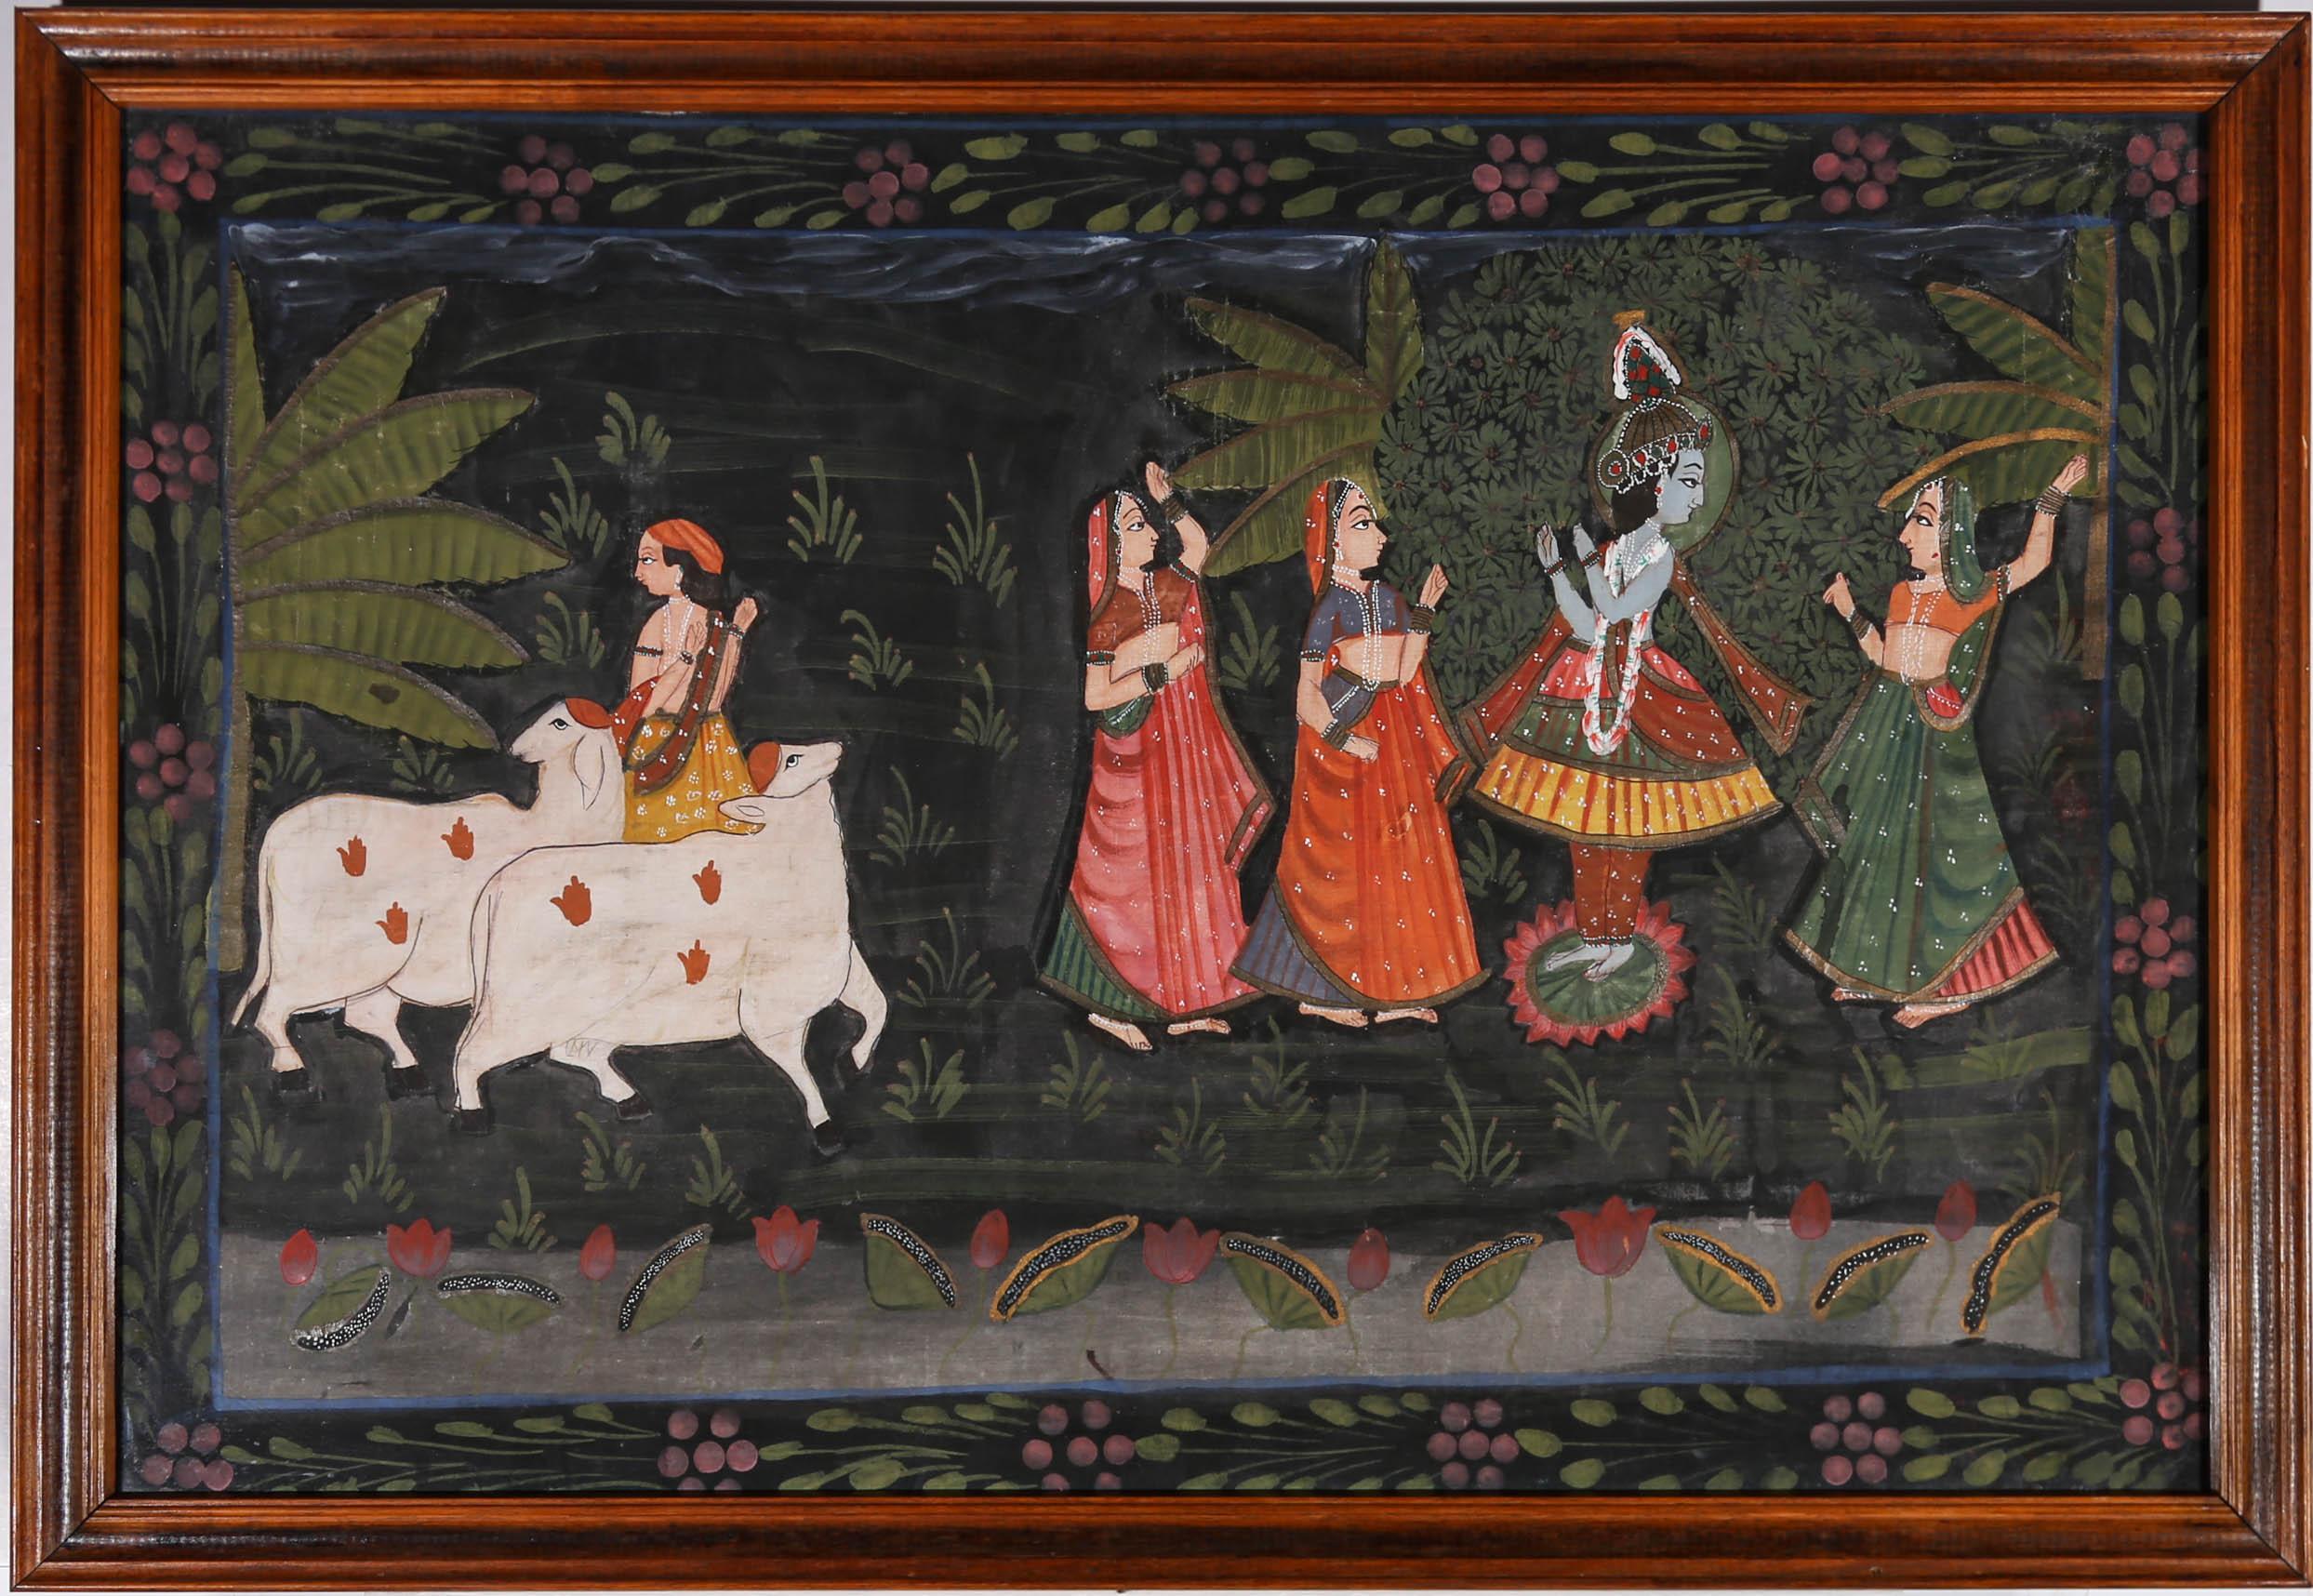 A decorative and detailed Indian watercolour and gouache scene depicting the Gopis of Vrindavan in dance with the lord Krishna. The seduced women can be seen surrounded by botanical trees and two sacred goats. All delicately encompassed in a painted